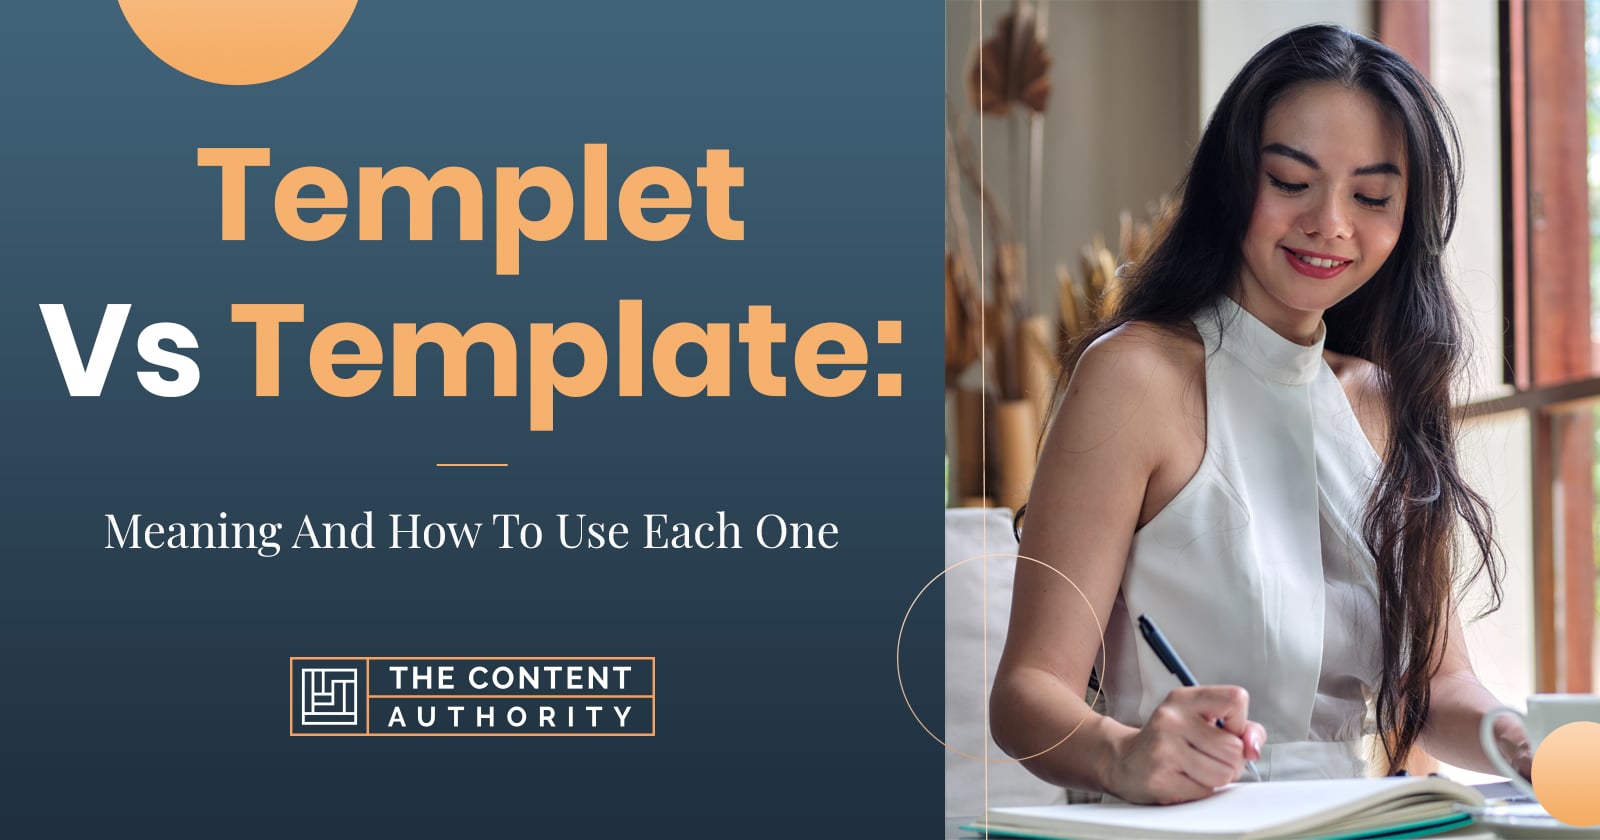 Templet Vs Template Meaning And How To Use Each One